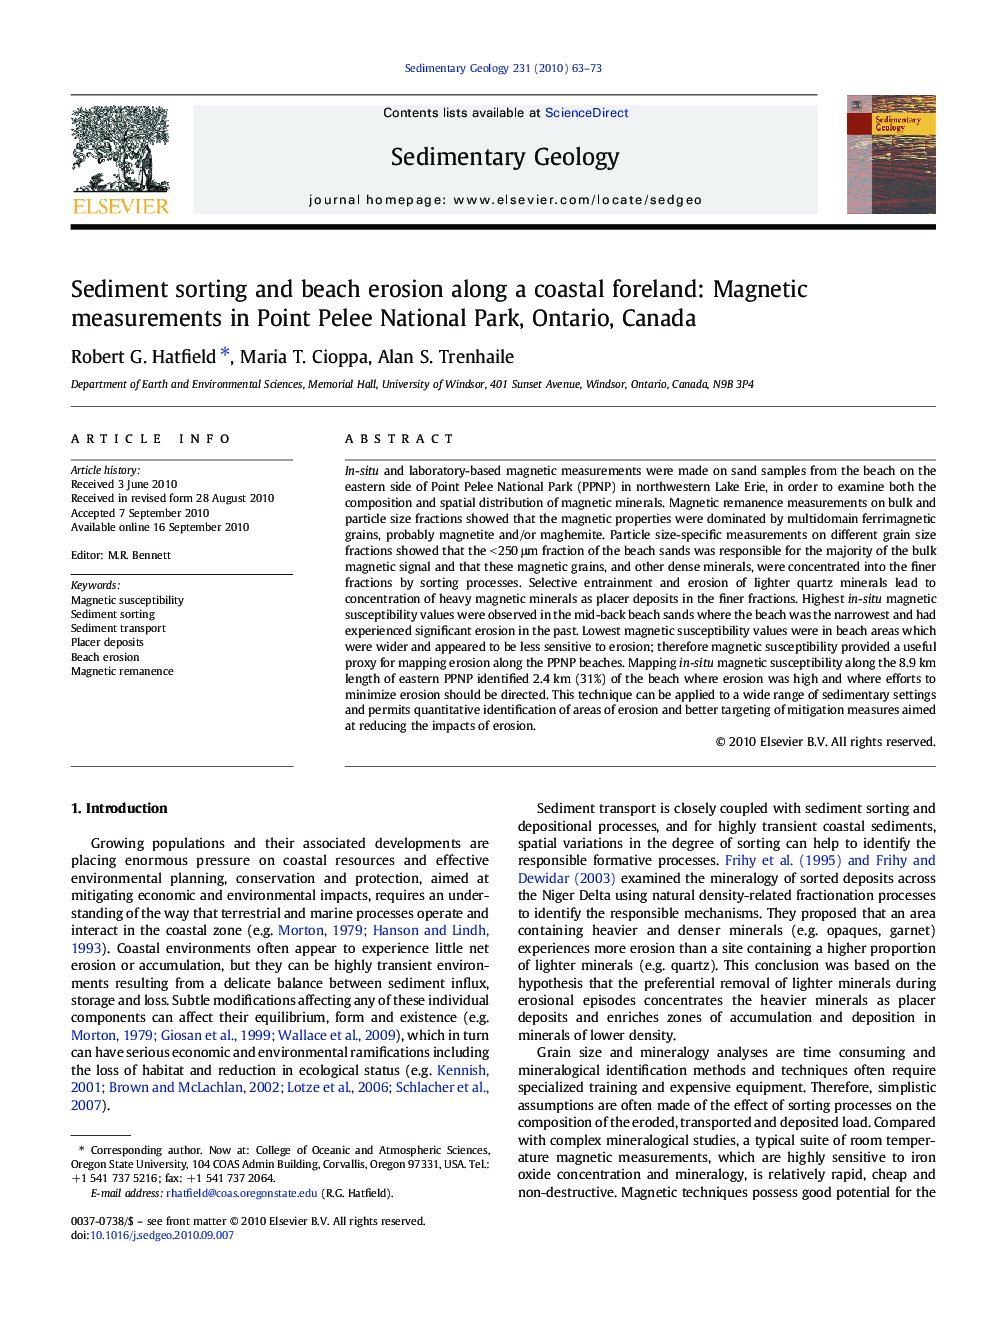 Sediment sorting and beach erosion along a coastal foreland: Magnetic measurements in Point Pelee National Park, Ontario, Canada